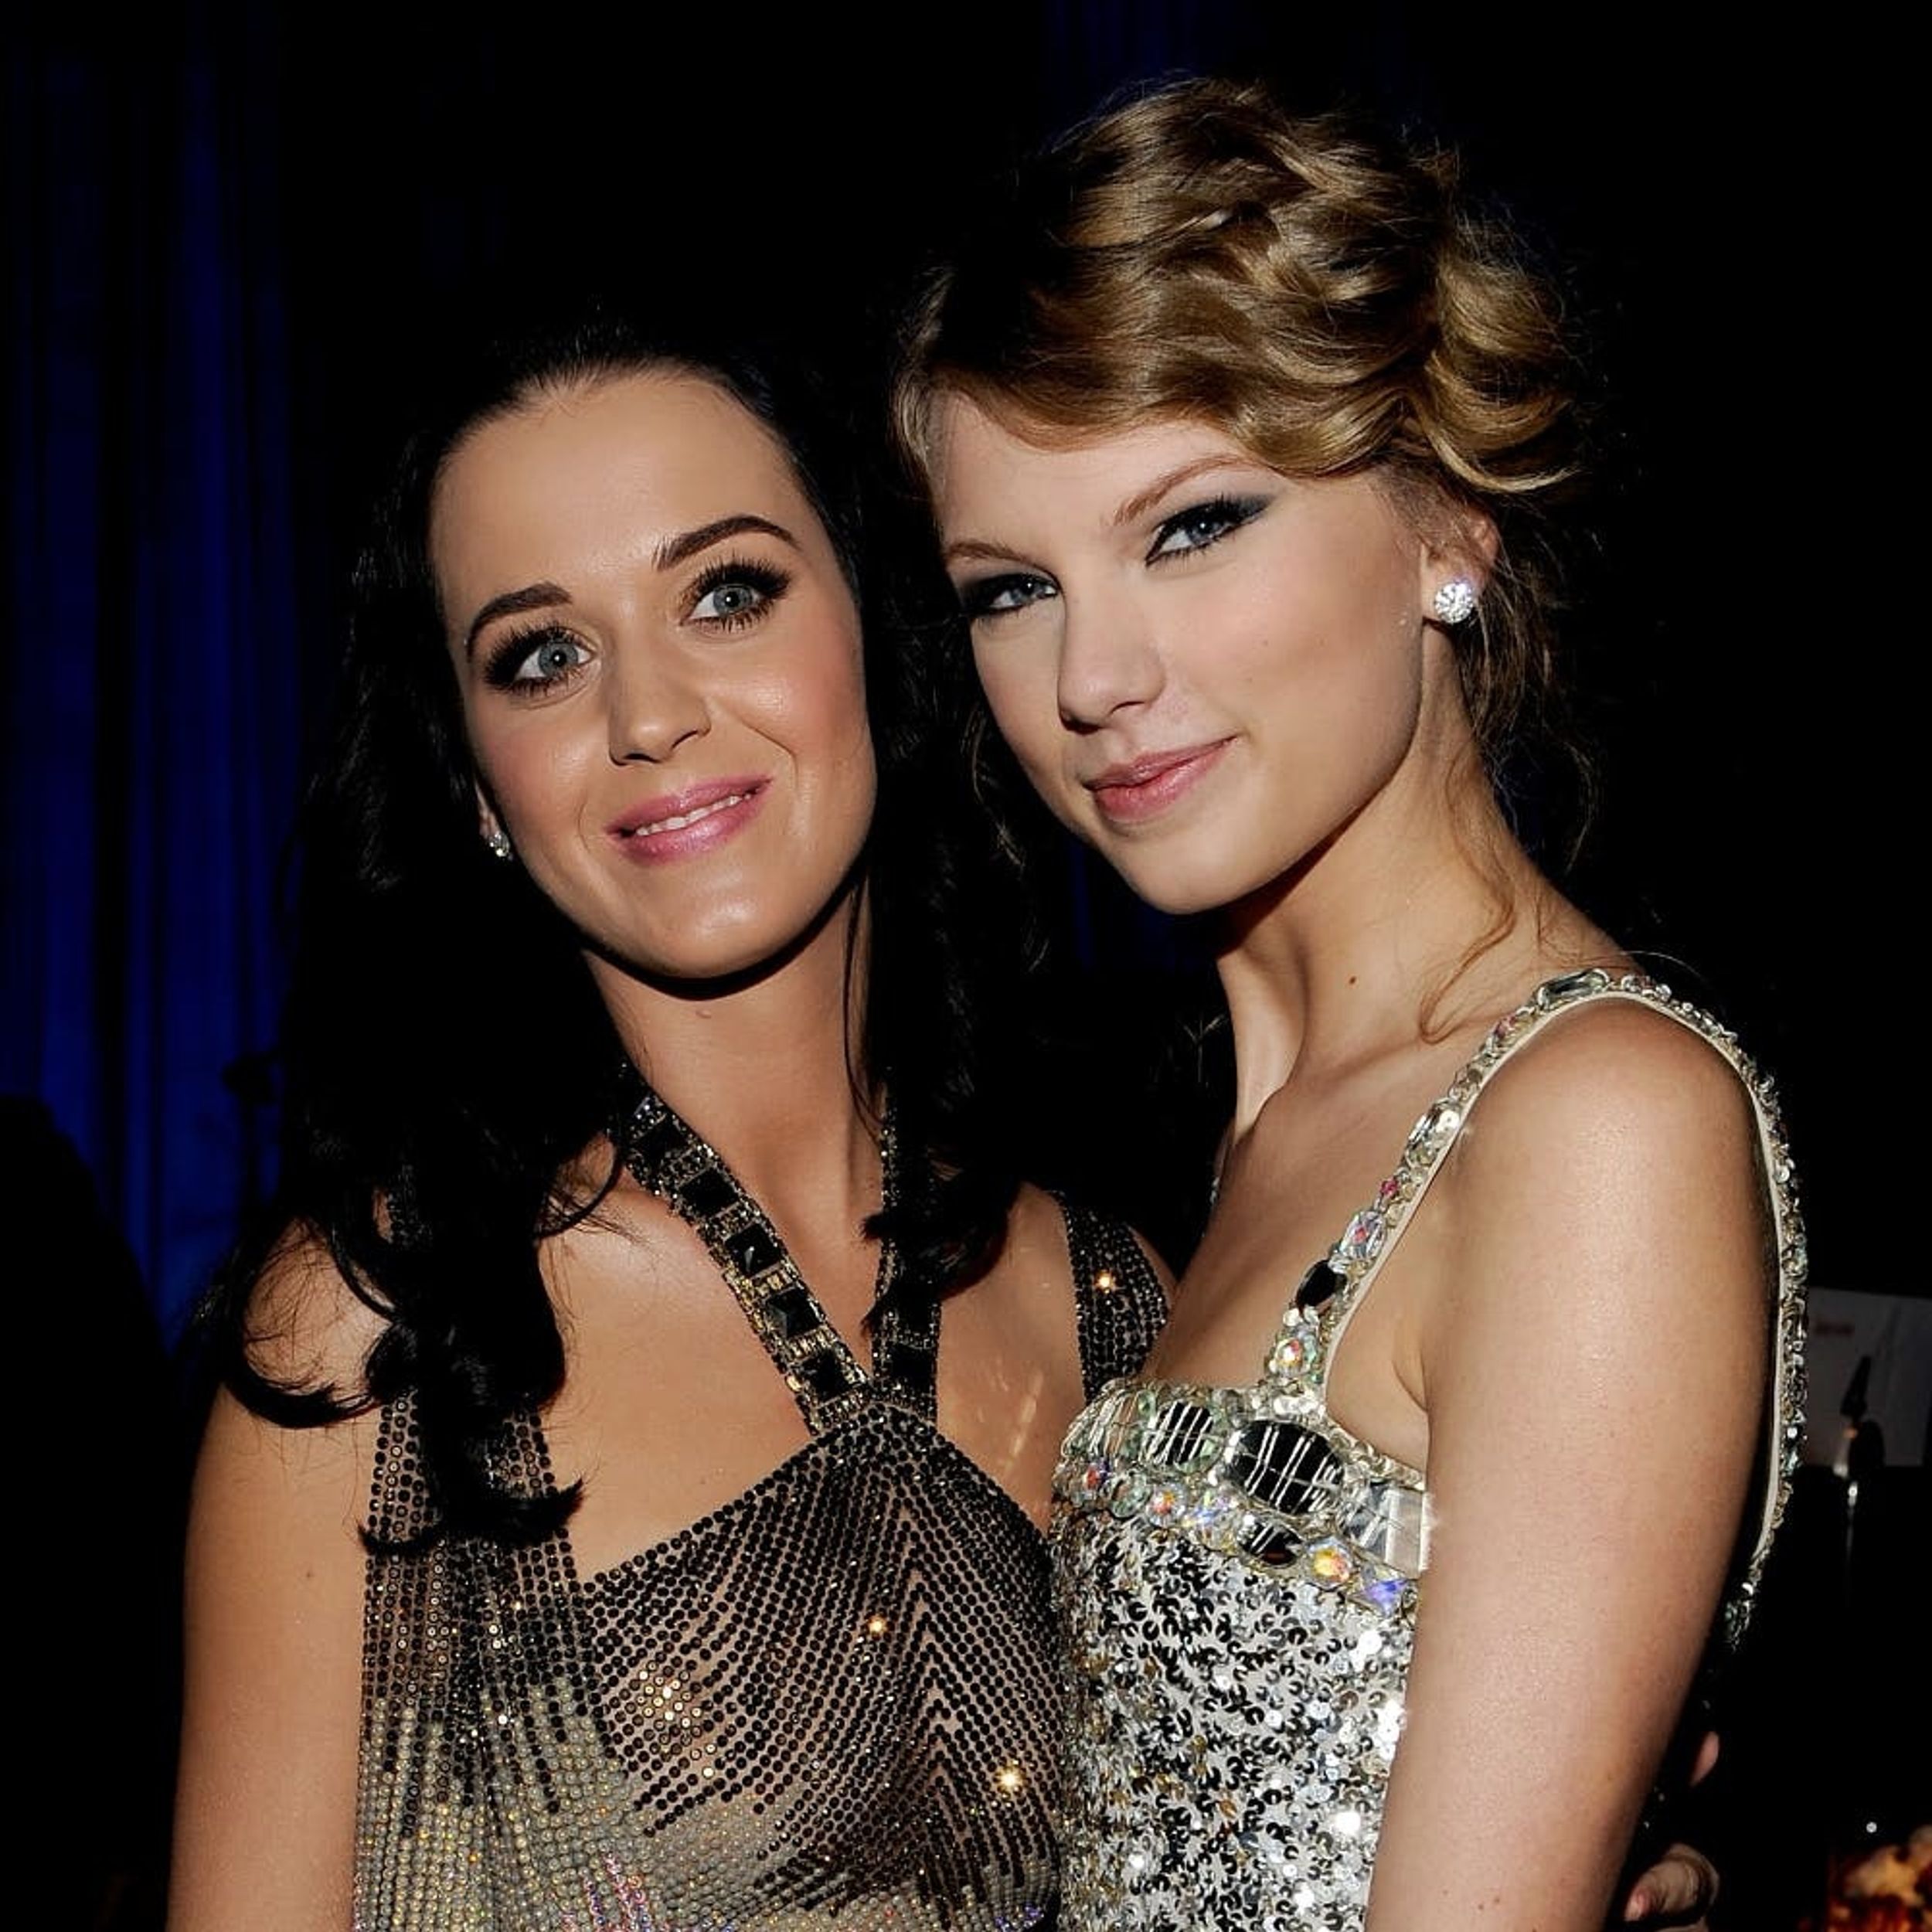 Katy Perry’s New Perfume Totally Sounds Like a Dig at Taylor Swift